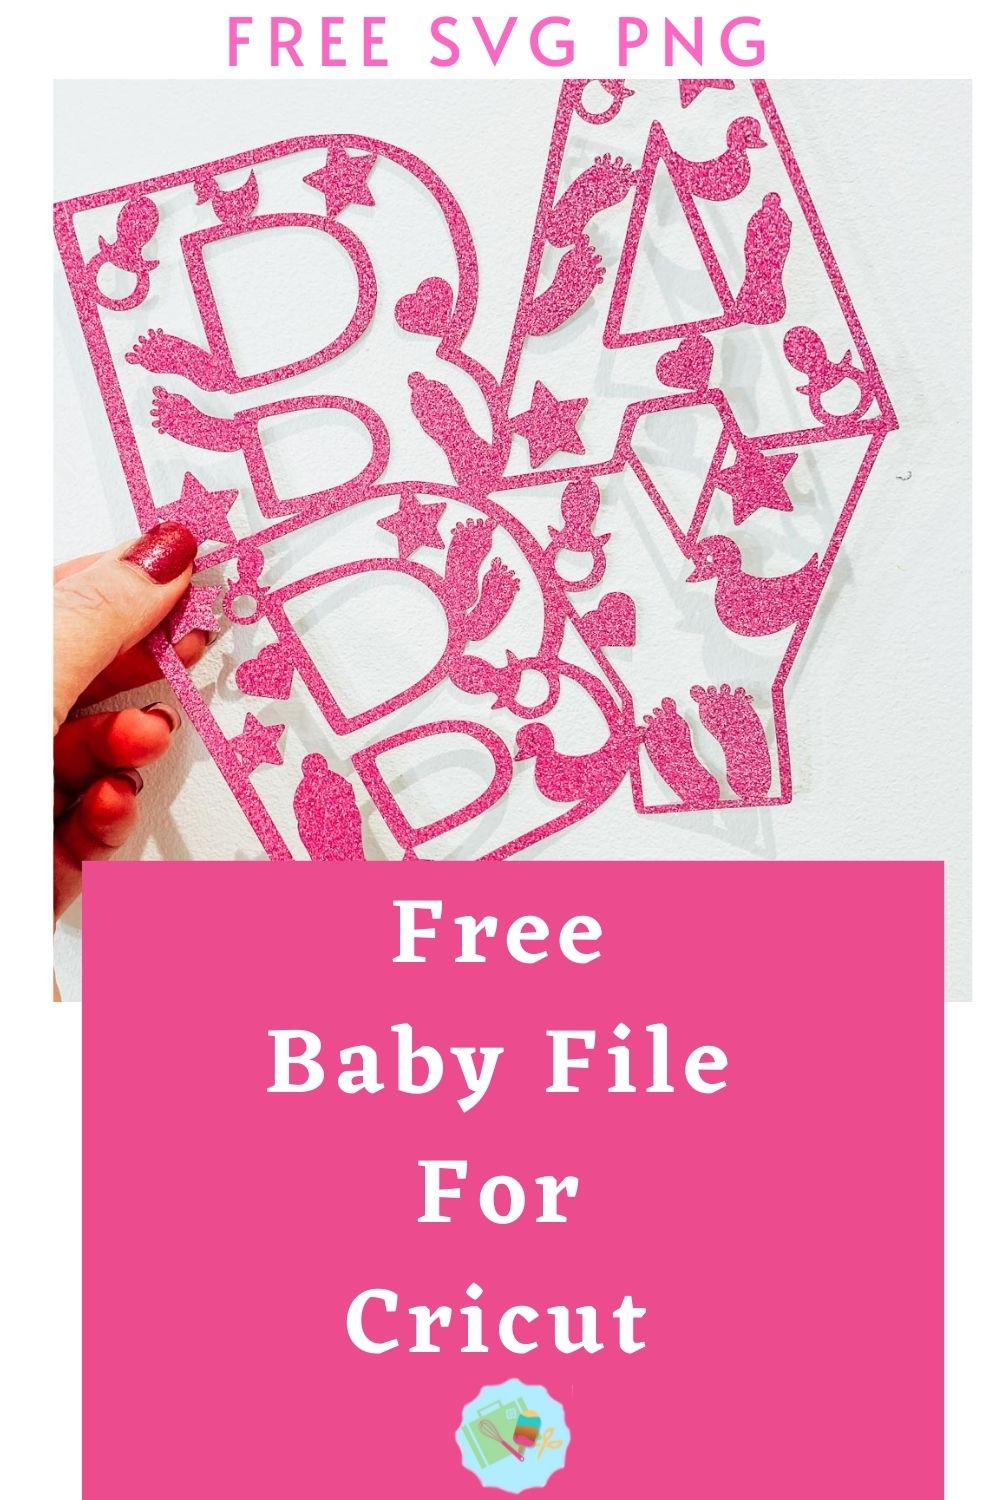 Free SVG Baby file for crafting and scrapbooking